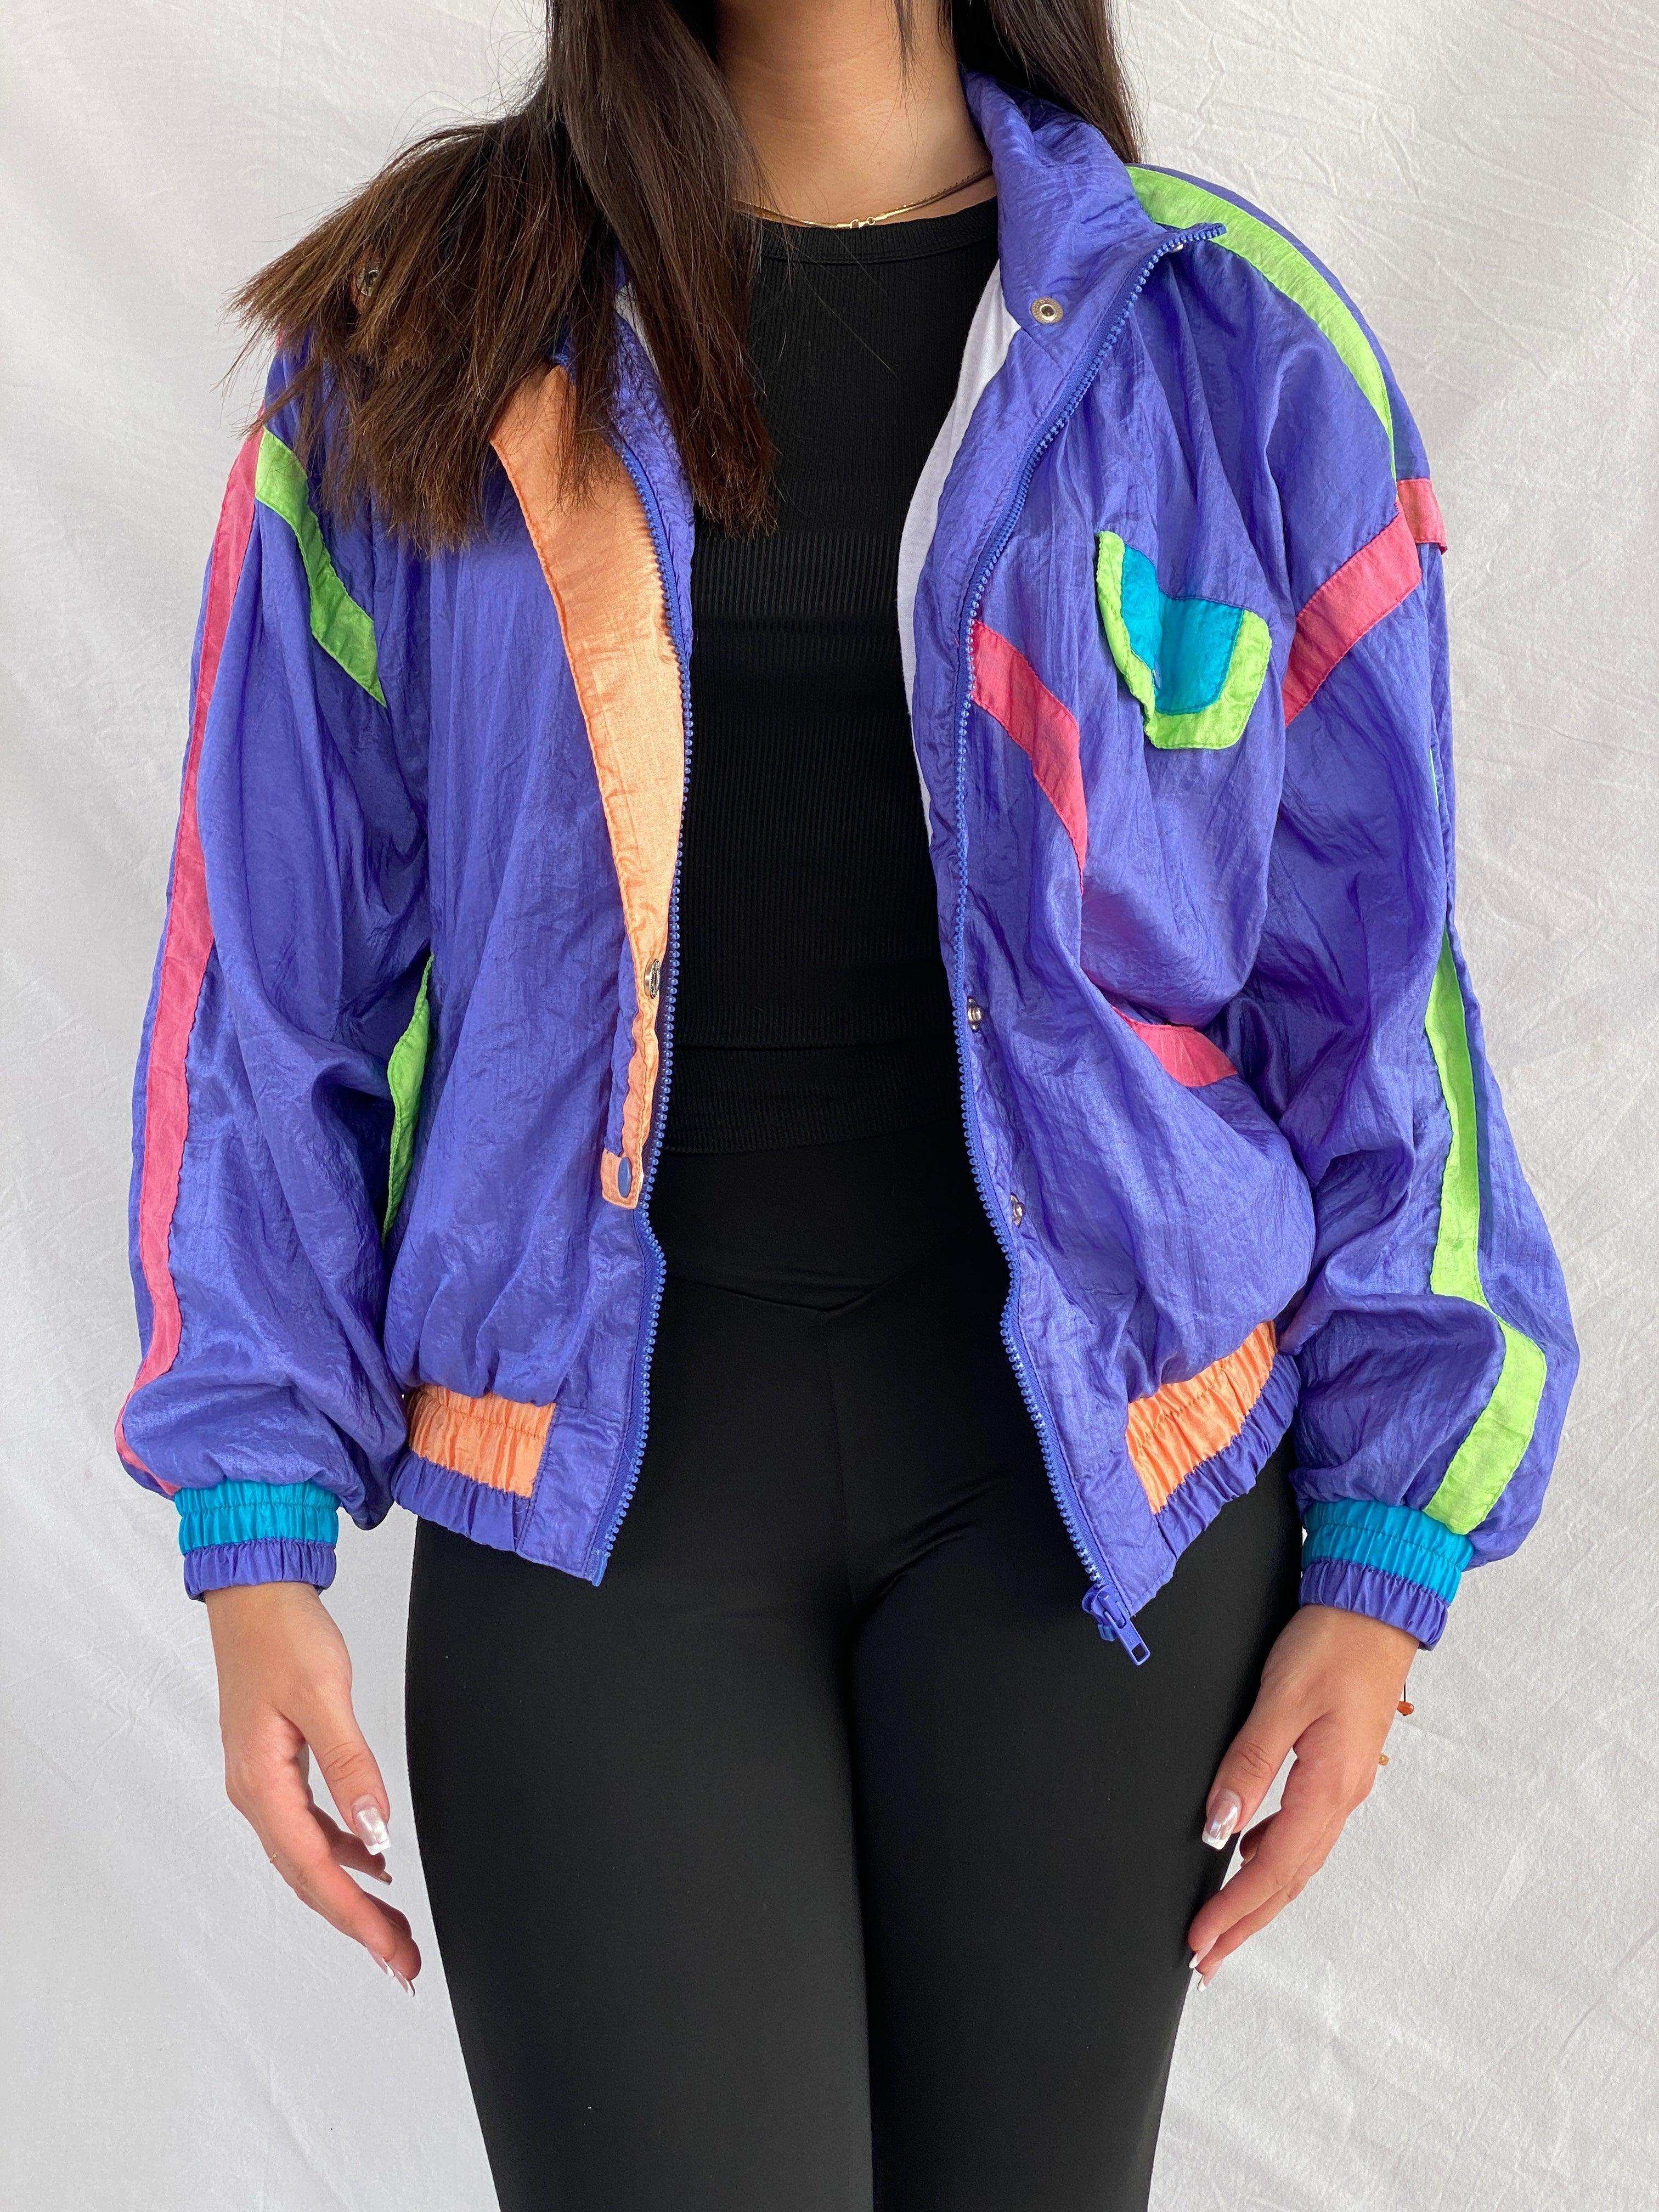 awesome 80s 90s windbreaker. a few small white marks